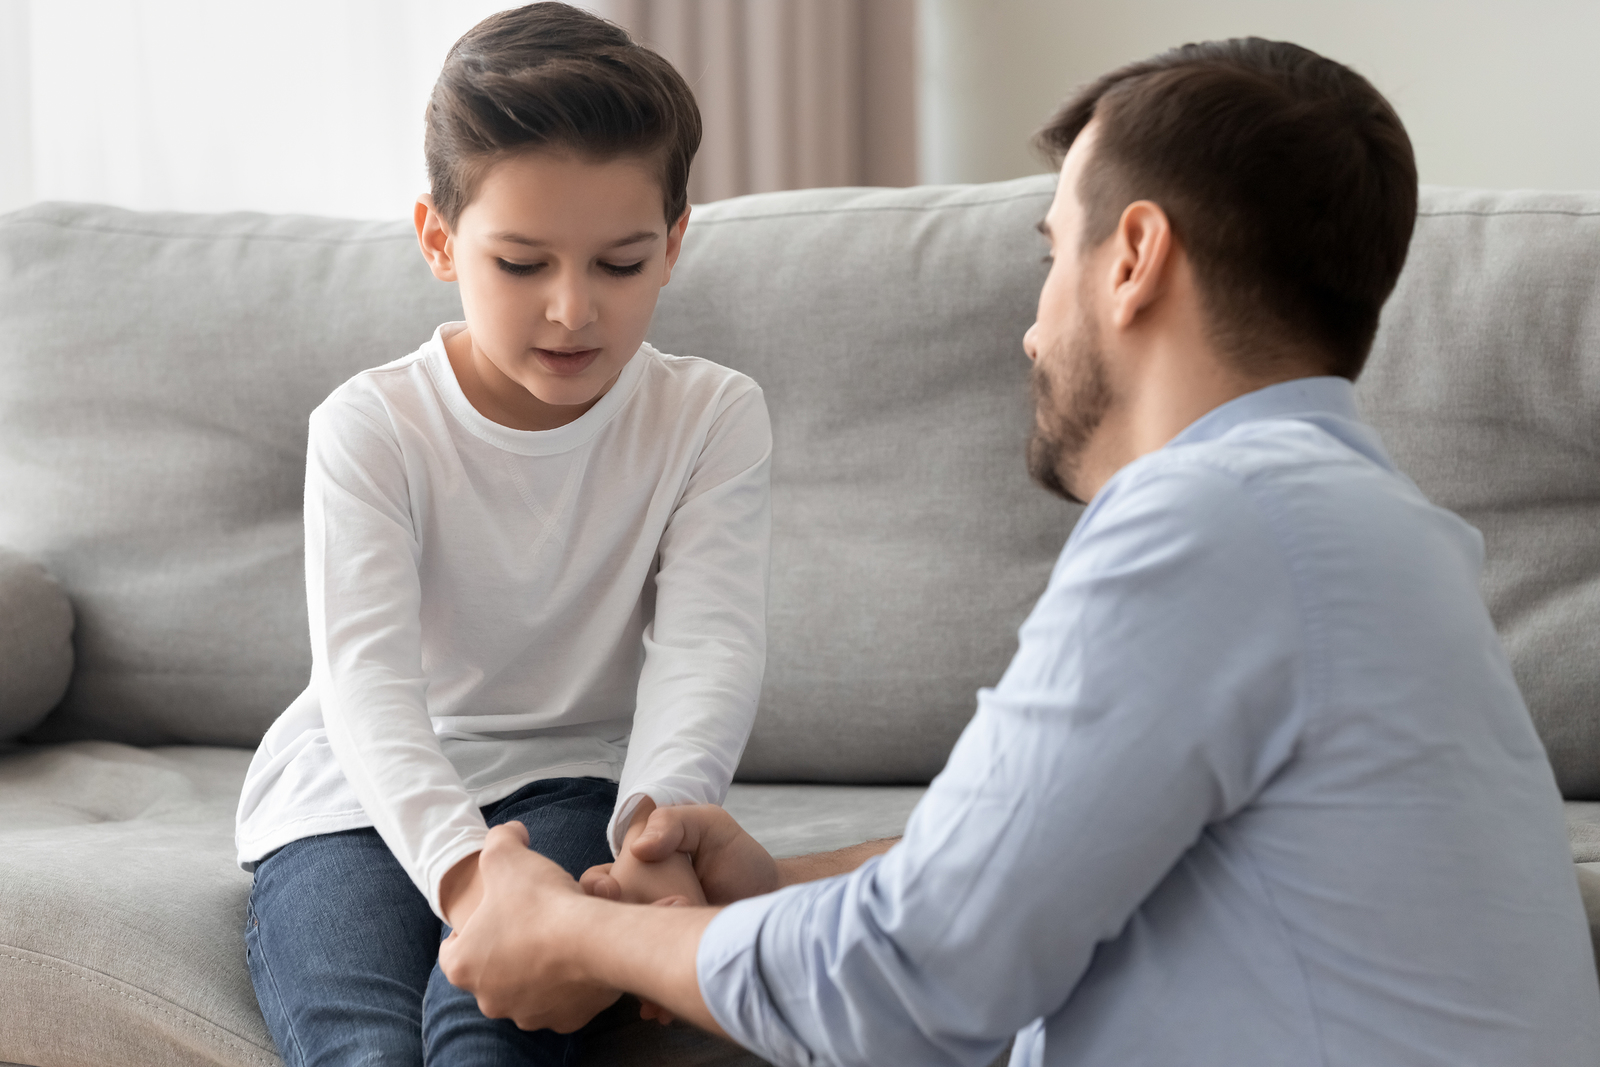 A worried father kneels to reassure his son on the couch. This could represent the support adhd testing offers for children with ADHD and their families. Contact us to learn about an ADHD test for children and ADHD testing near Tampa, FL.  